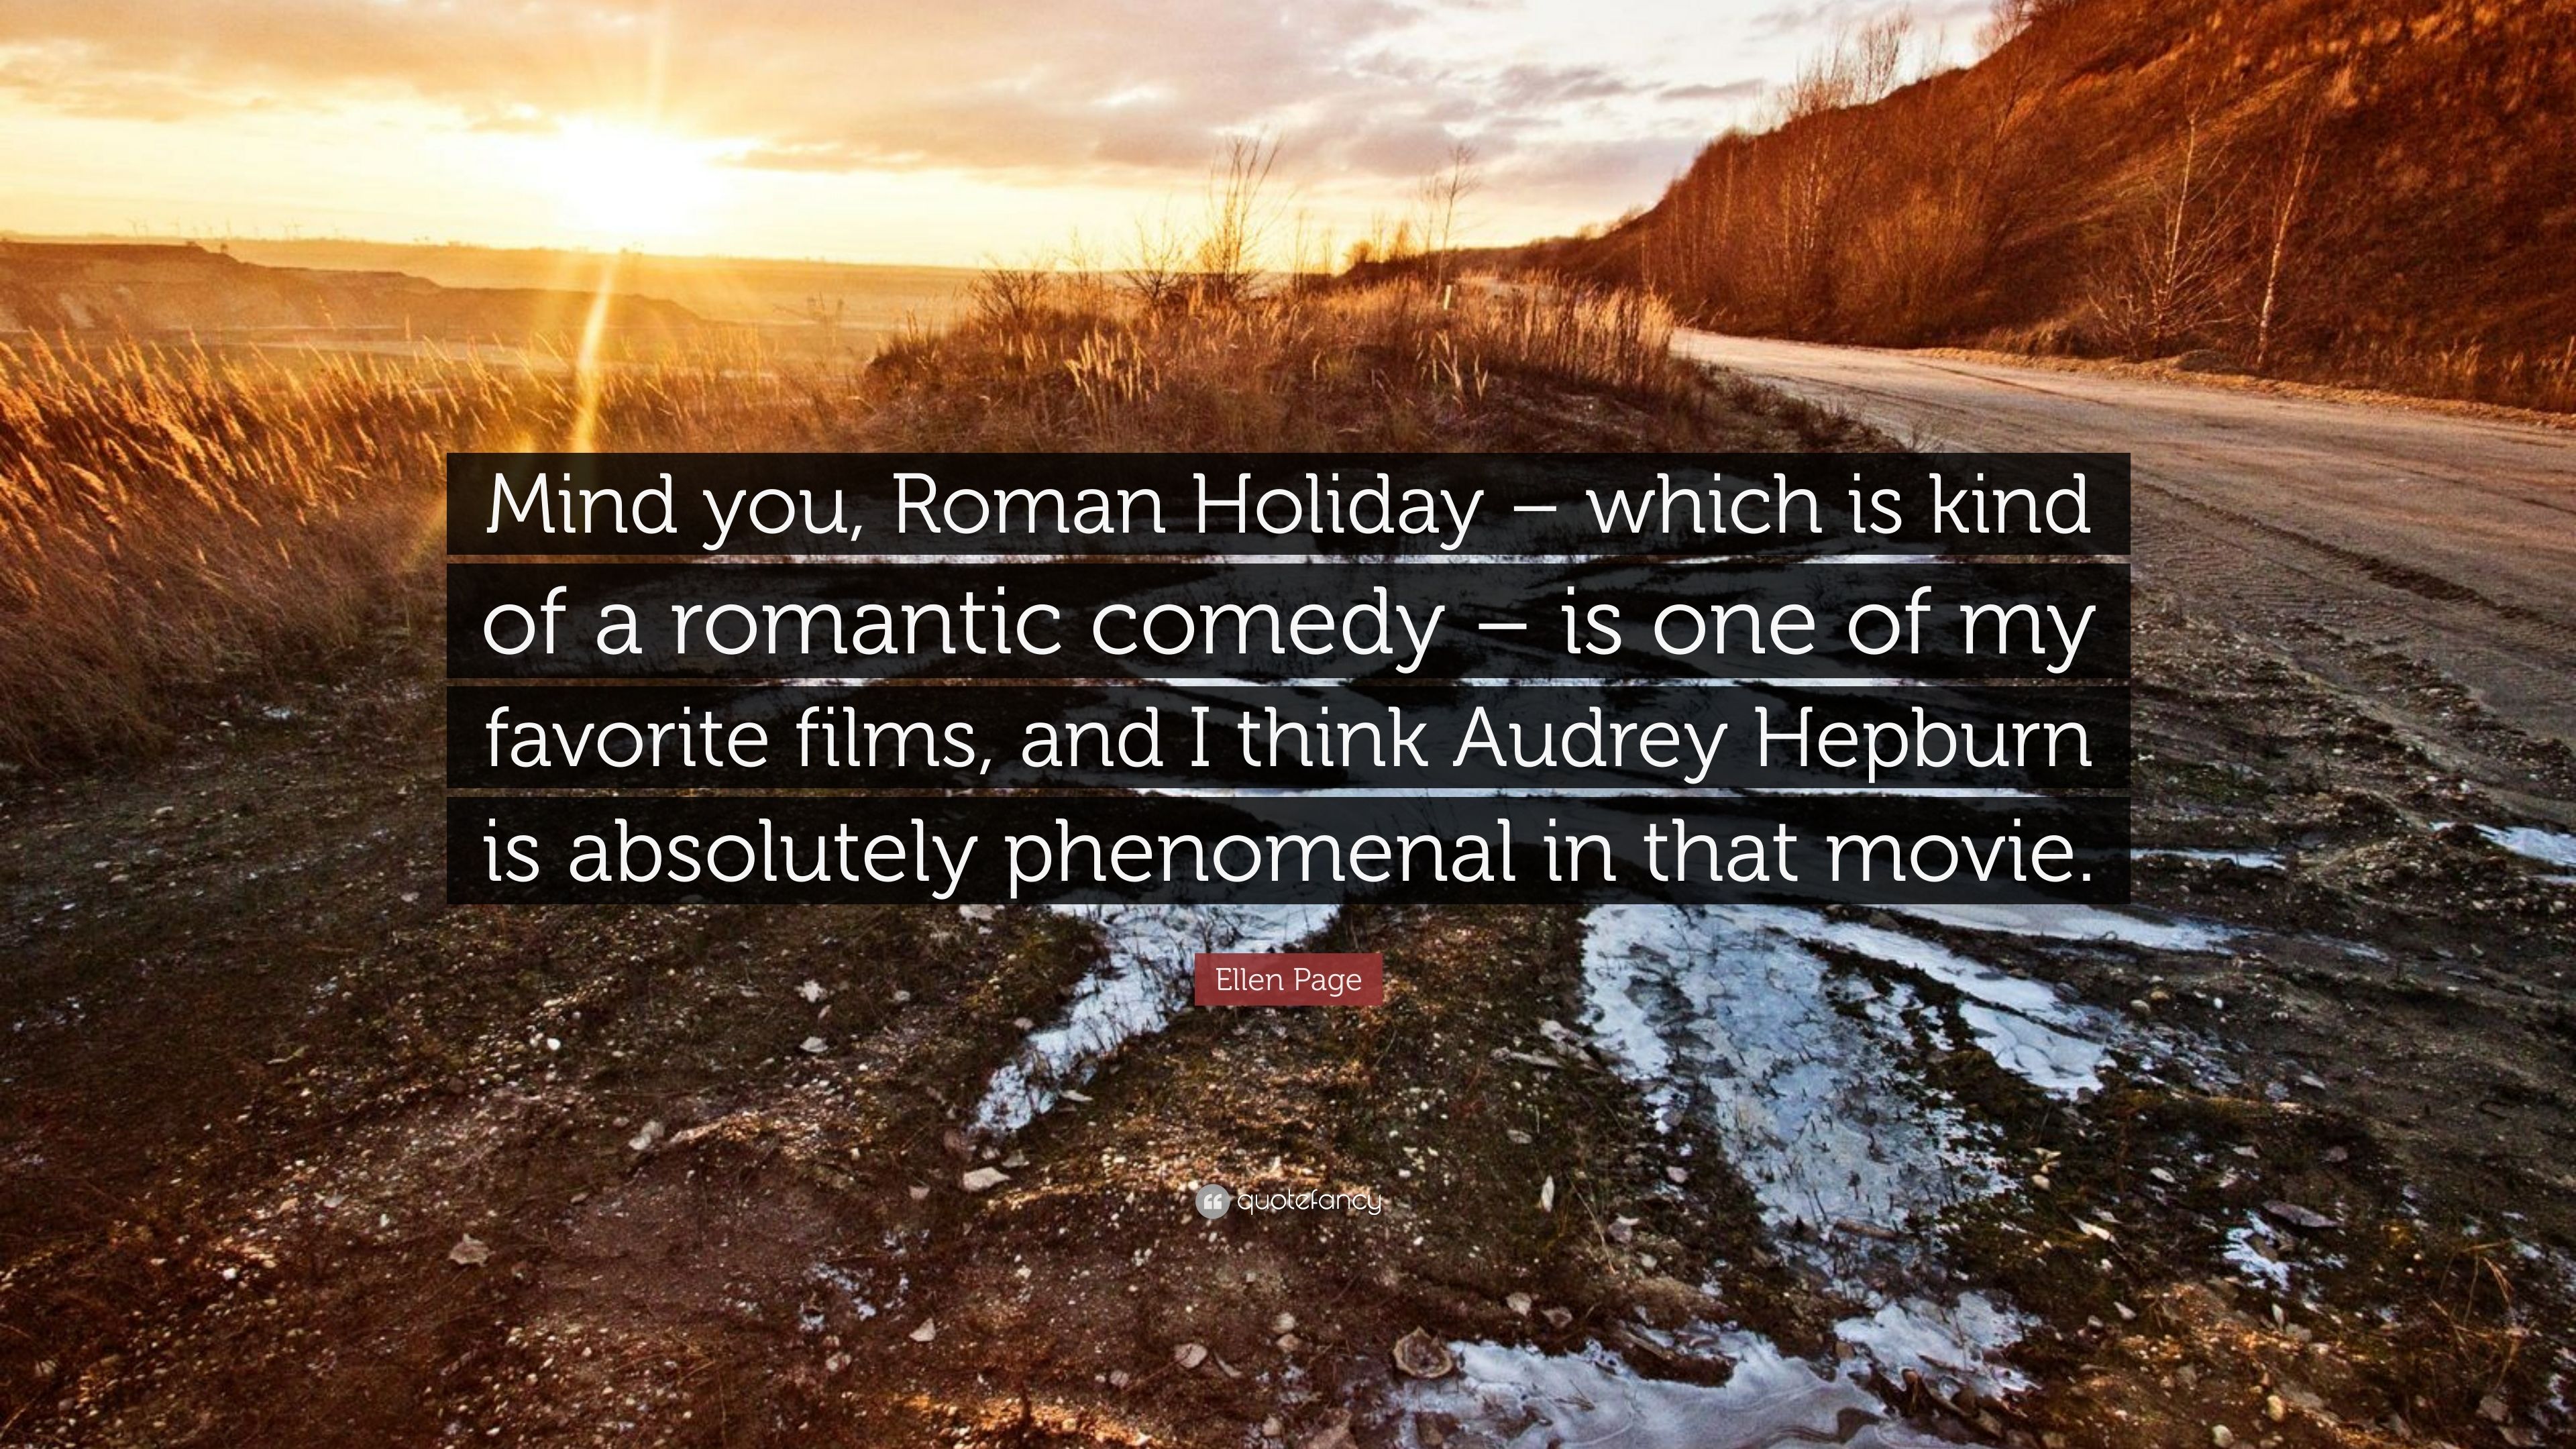 Ellen Page Quote: “Mind you, Roman Holiday